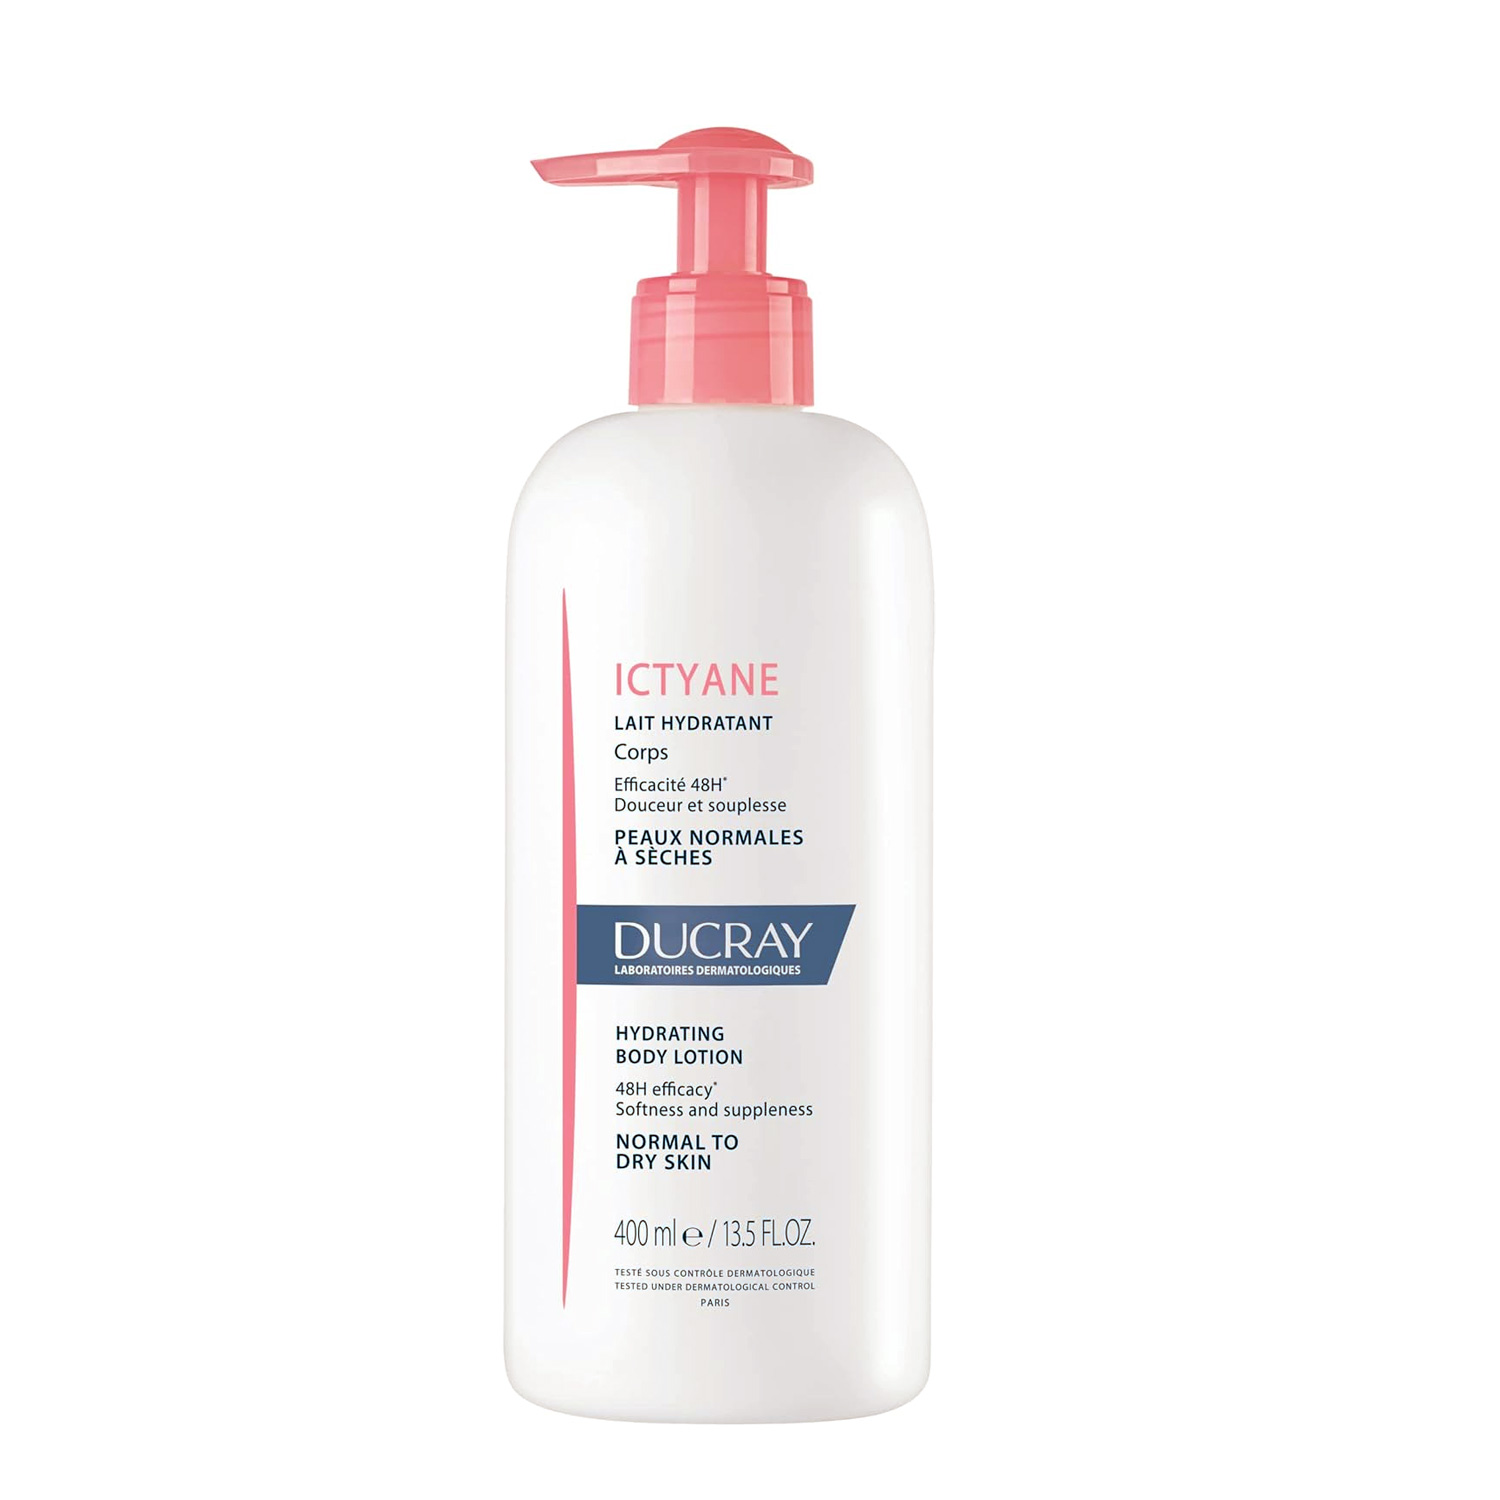 Ducray Ictyane Hydrating Body Lotion 400ml (New Version)